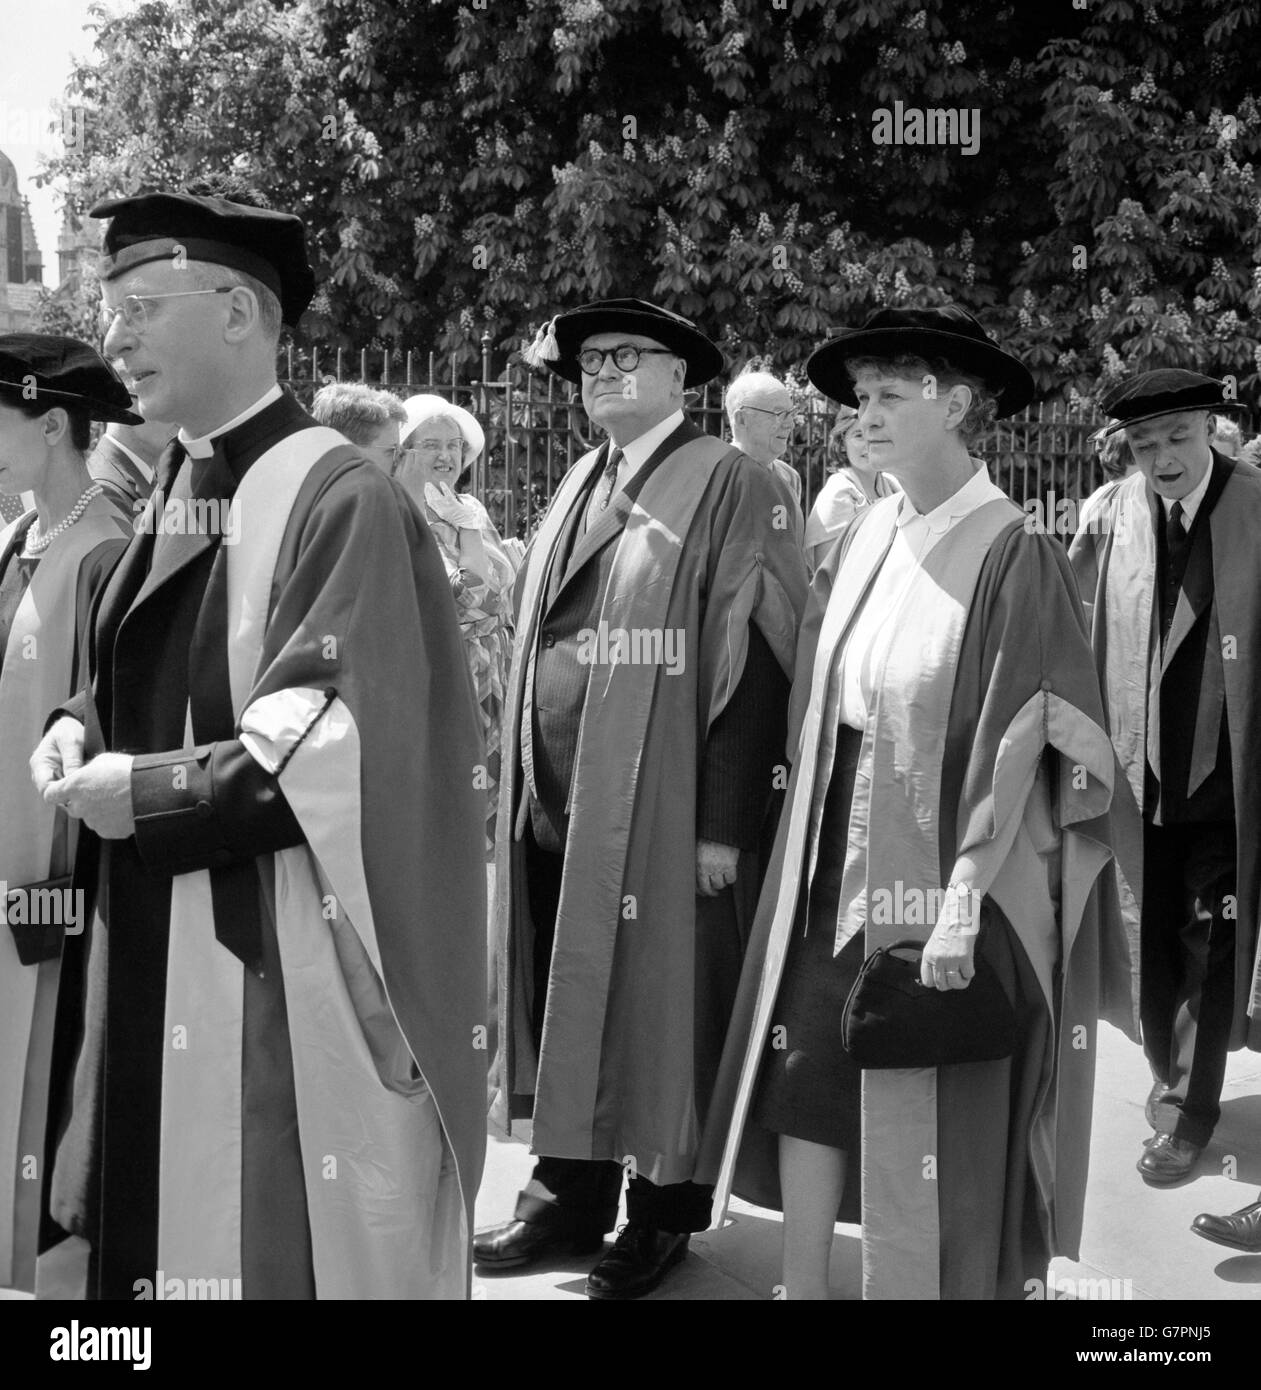 Francois Louis Ganshof, Emeritus Professor of Medieval History in the University of Ghent, Belgium, walking in procession with Dame Evelyn Adelaide Sharp at Cambridge when they received honorary degrees at the University. The Belgian University professor received an honorary doctorate of letters and Dame Evelyn received an honorary doctorate of law. The conferment was held in Cambridge University's Senate House. Stock Photo